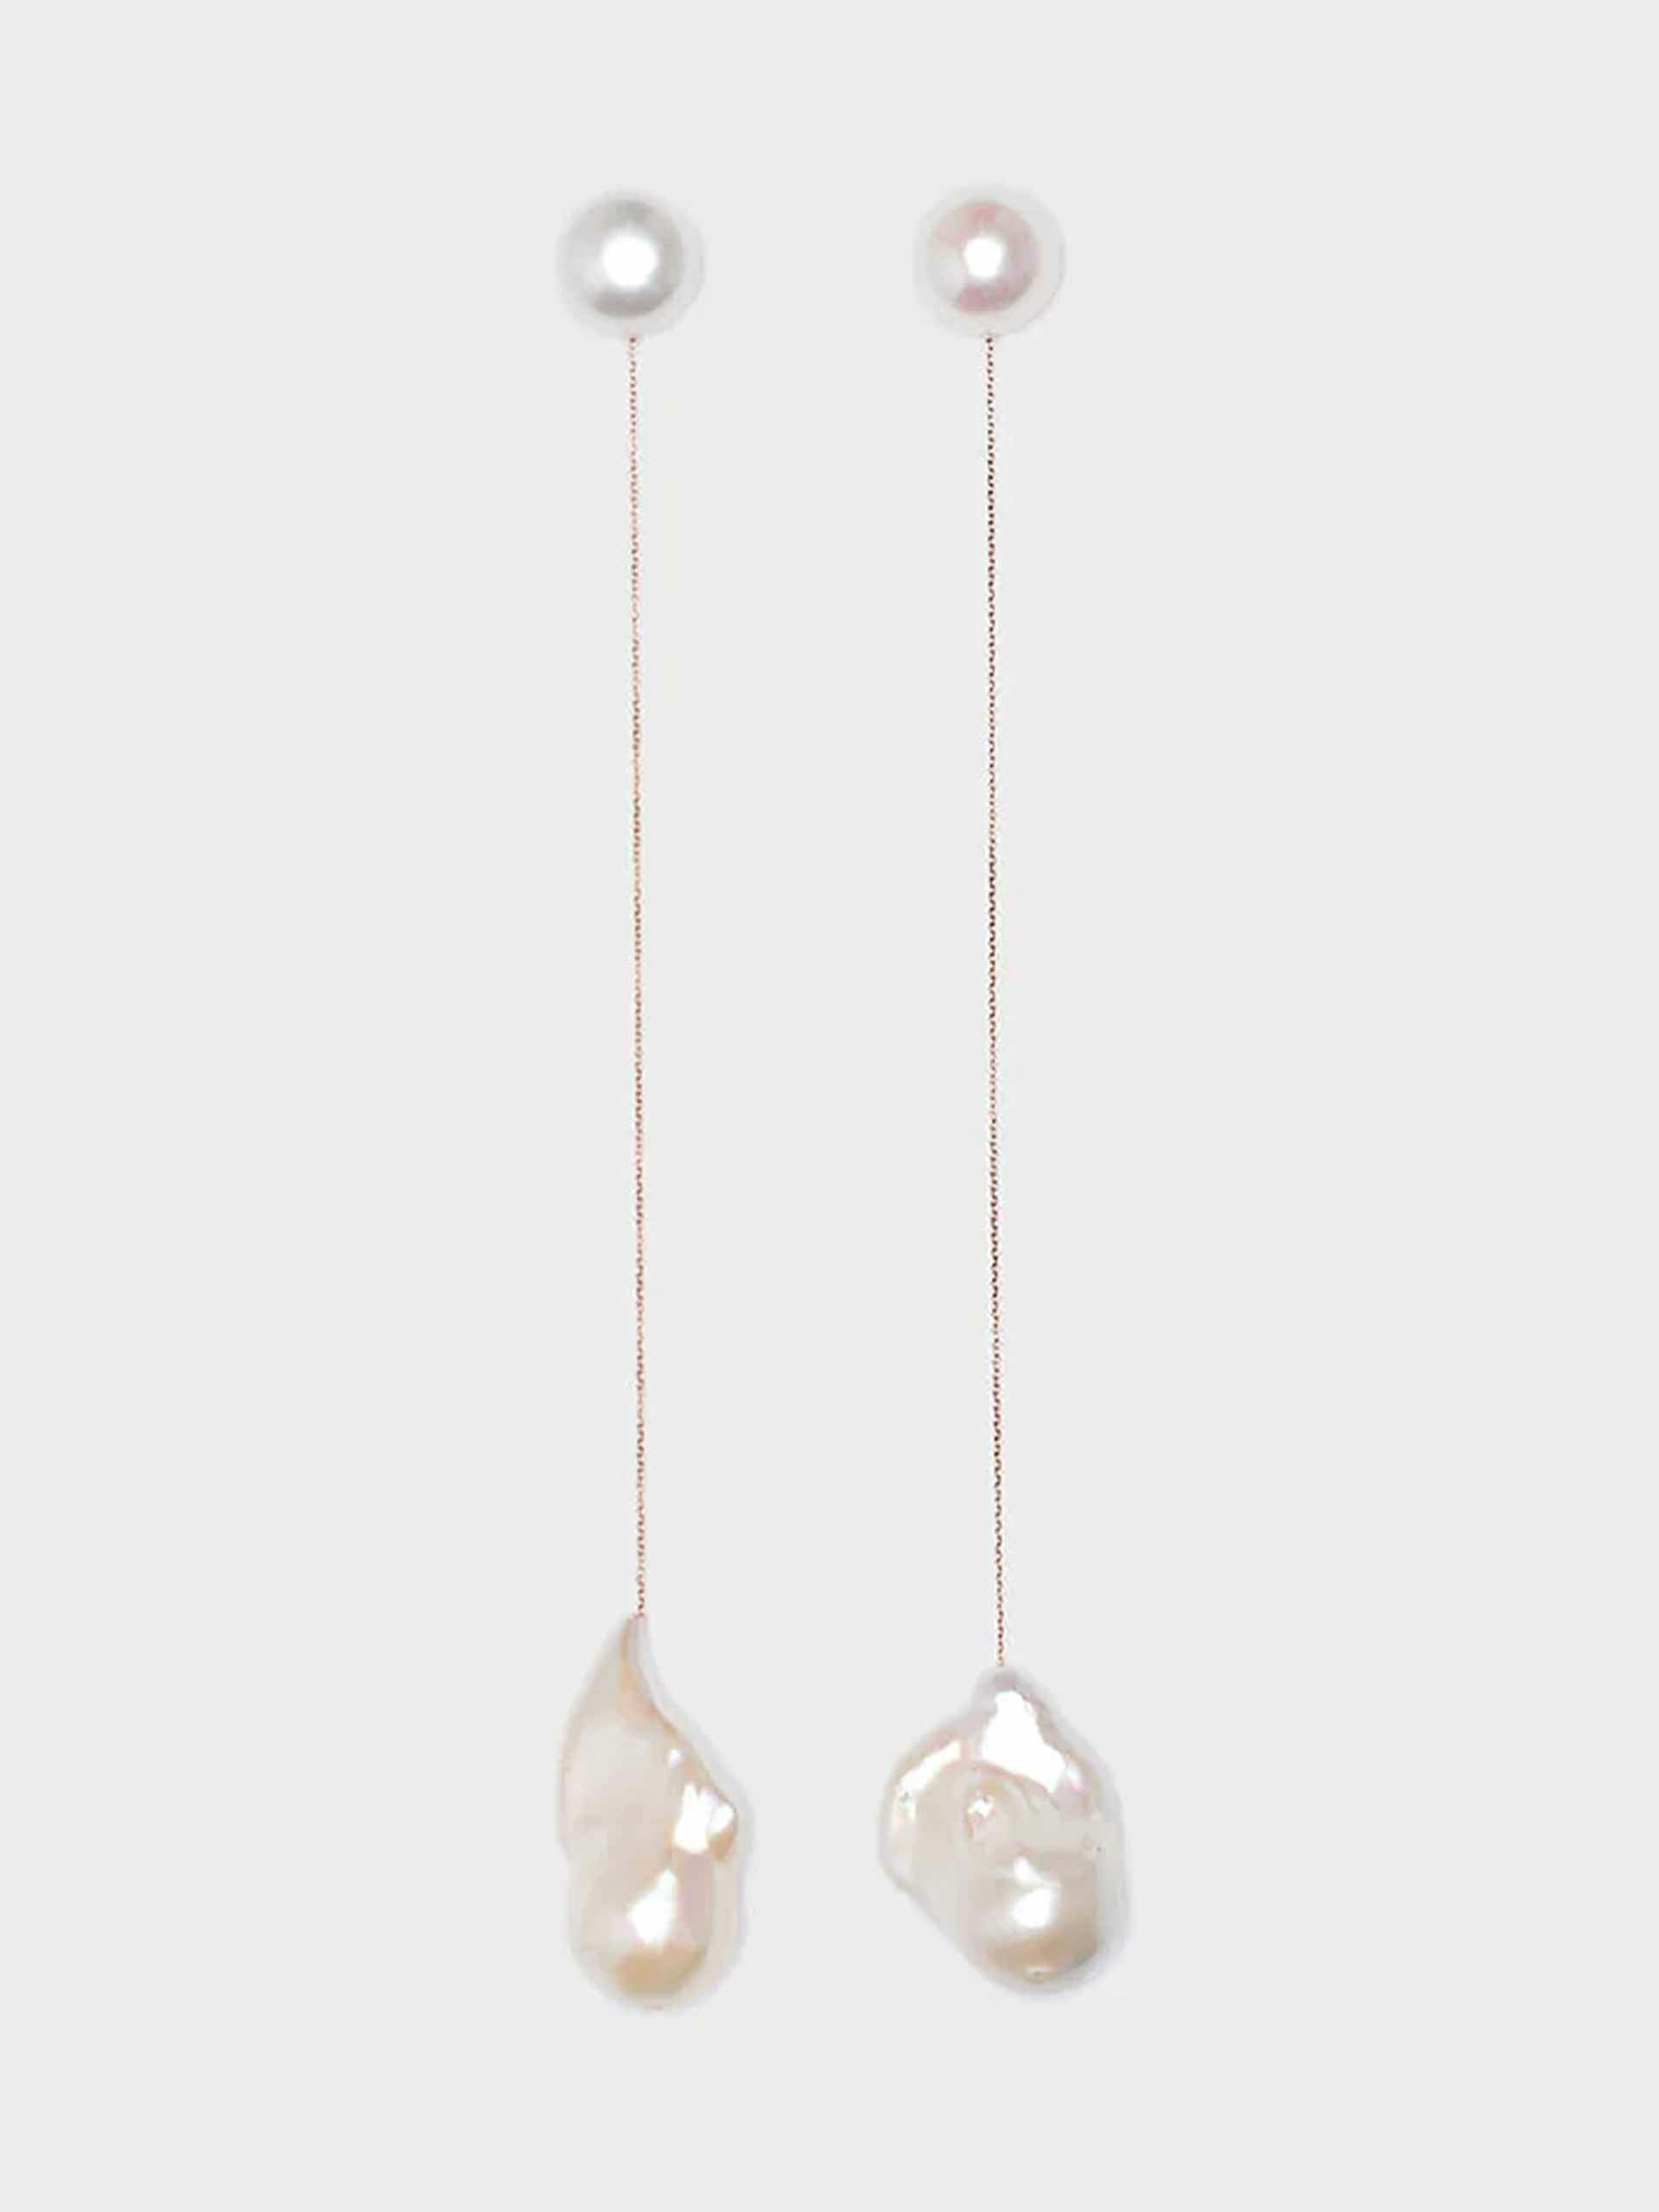 Flaired baroque pearl drop earrings